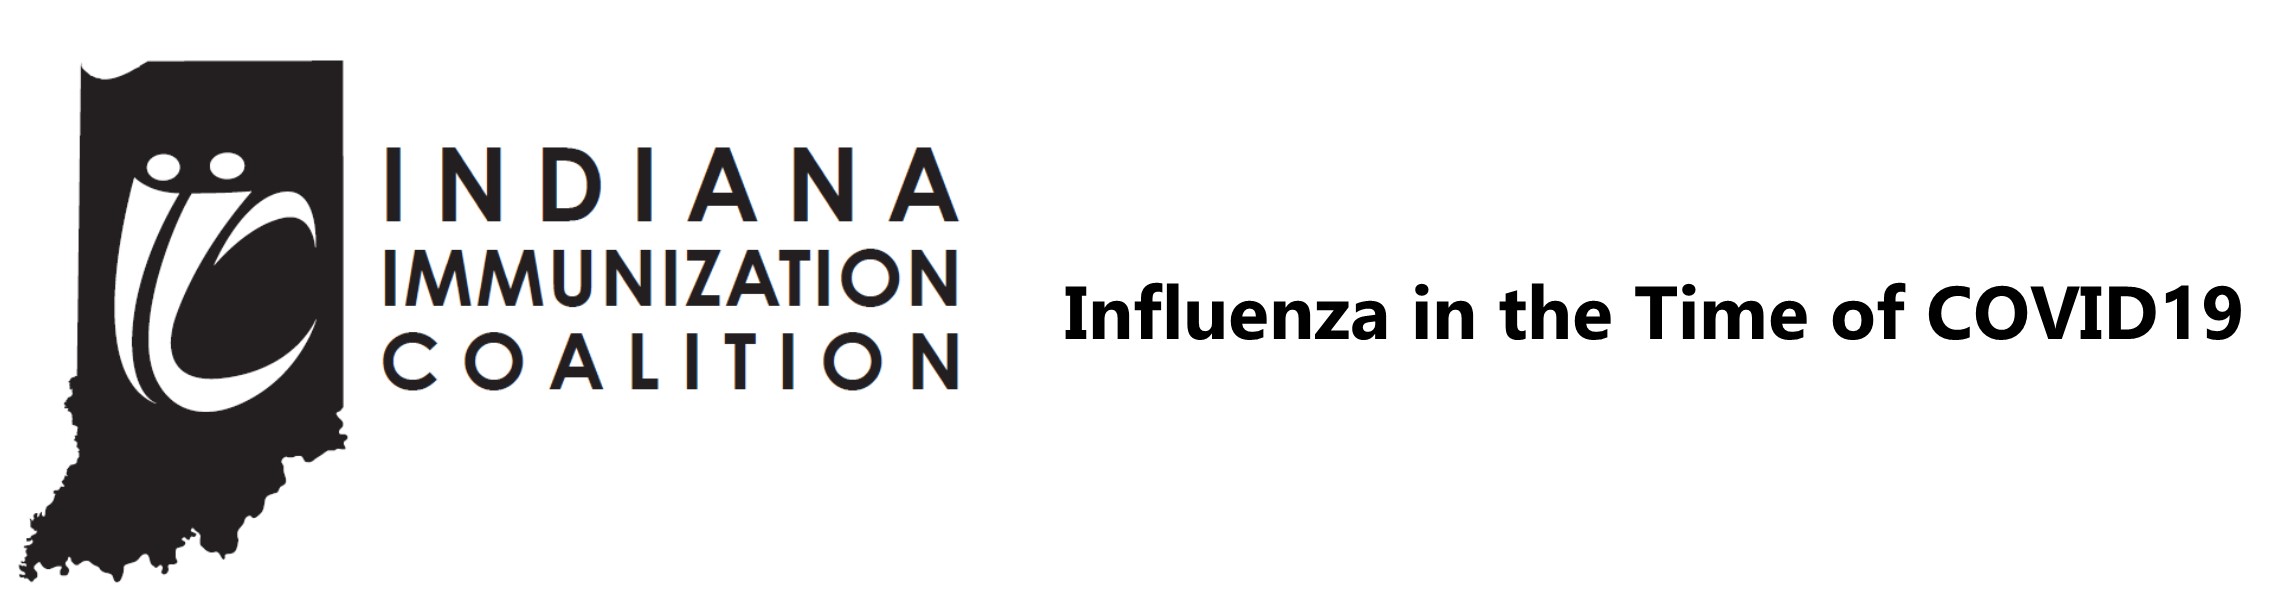 Influenza in the Time of COVID 19 Banner